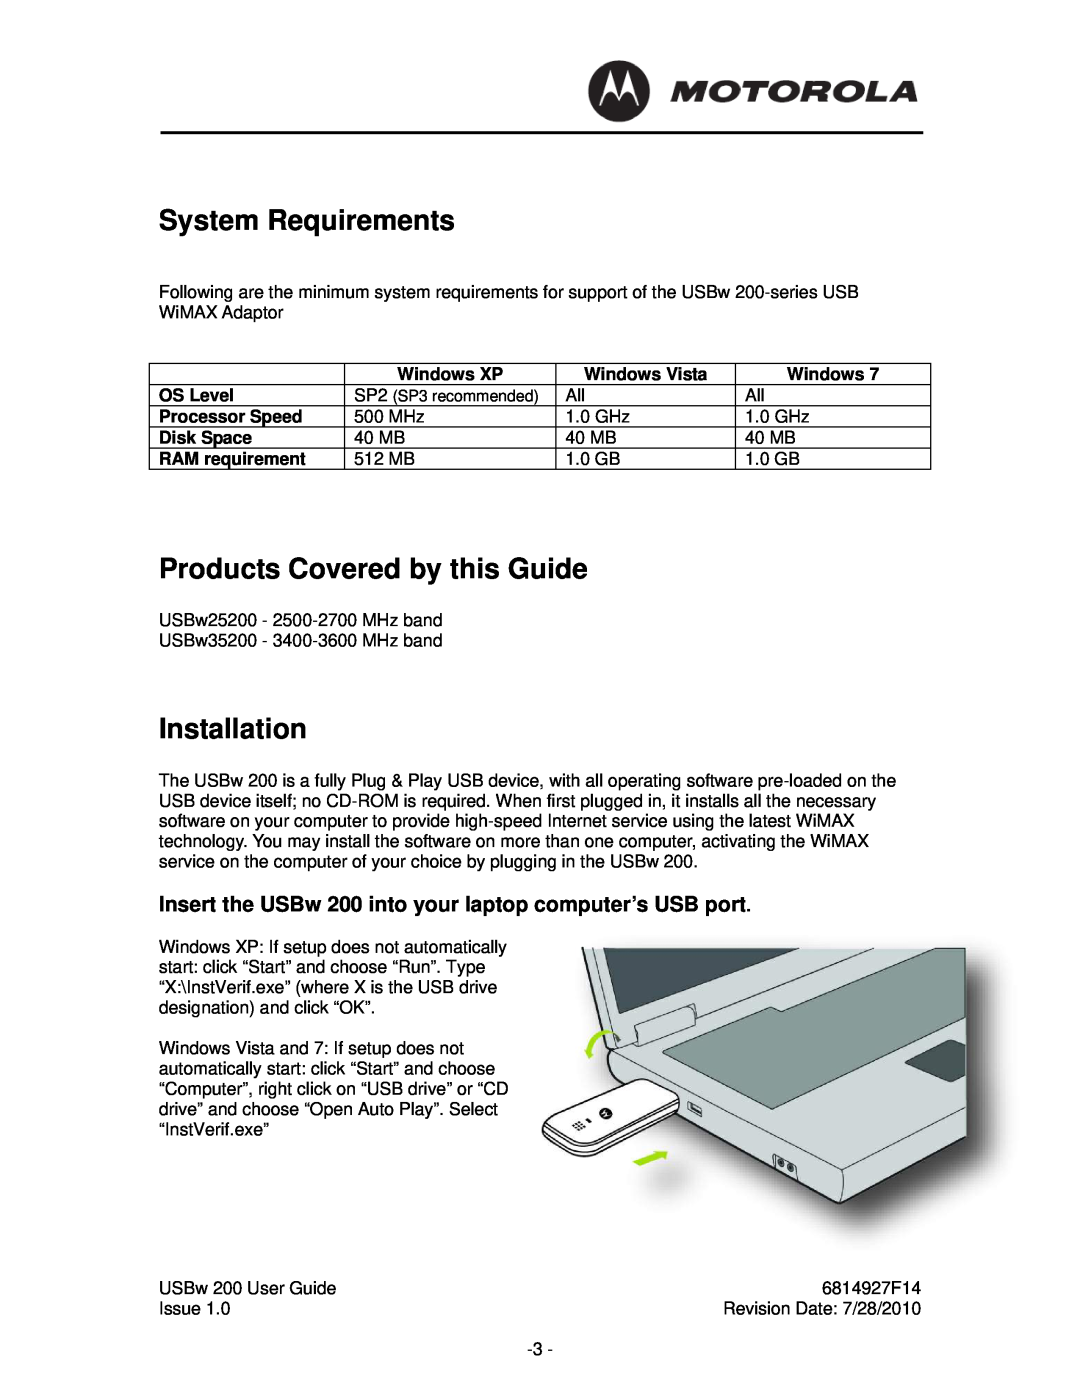 Motorola USBW 200 System Requirements, Products Covered by this Guide, Installation, Windows XP, Windows Vista, OS Level 